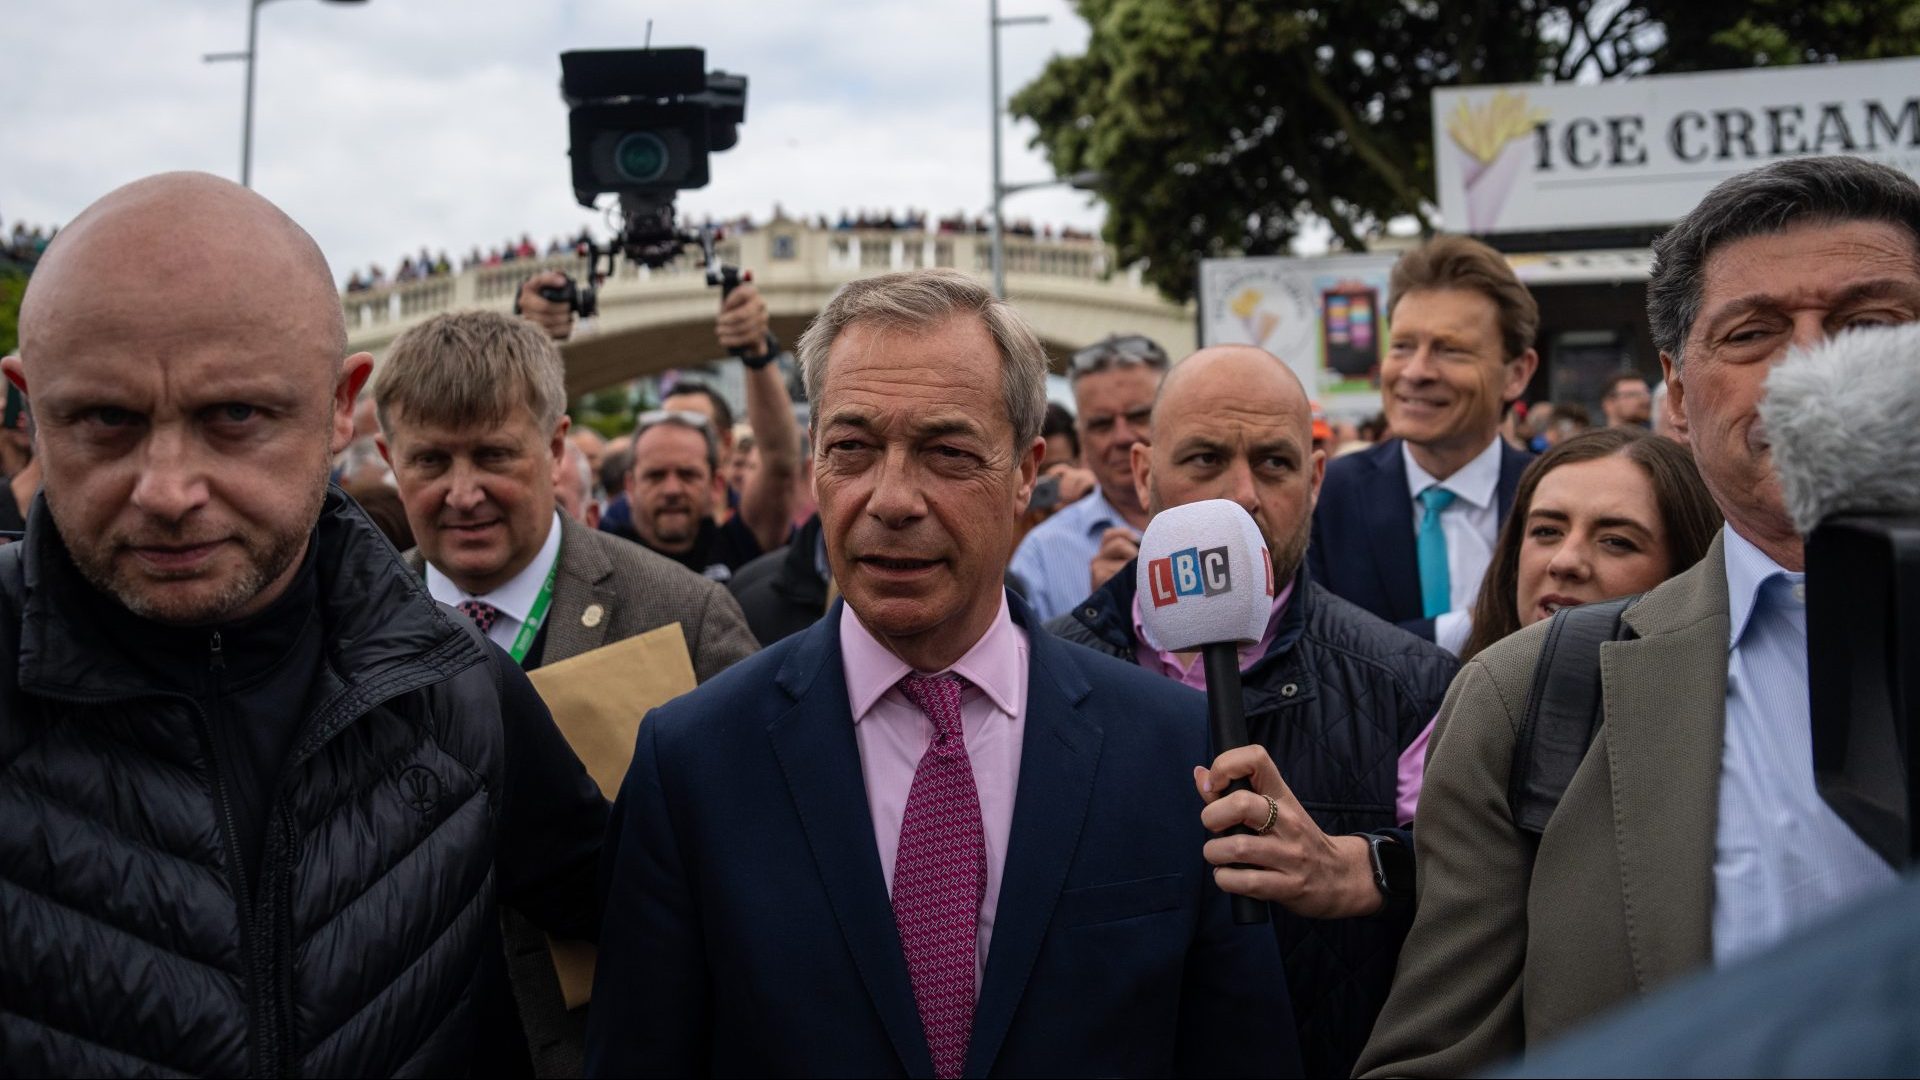 Nigel Farage walks to speak to supporters as he launches his election candidacy at Clacton Pier (Photo by Carl Court/Getty Images)